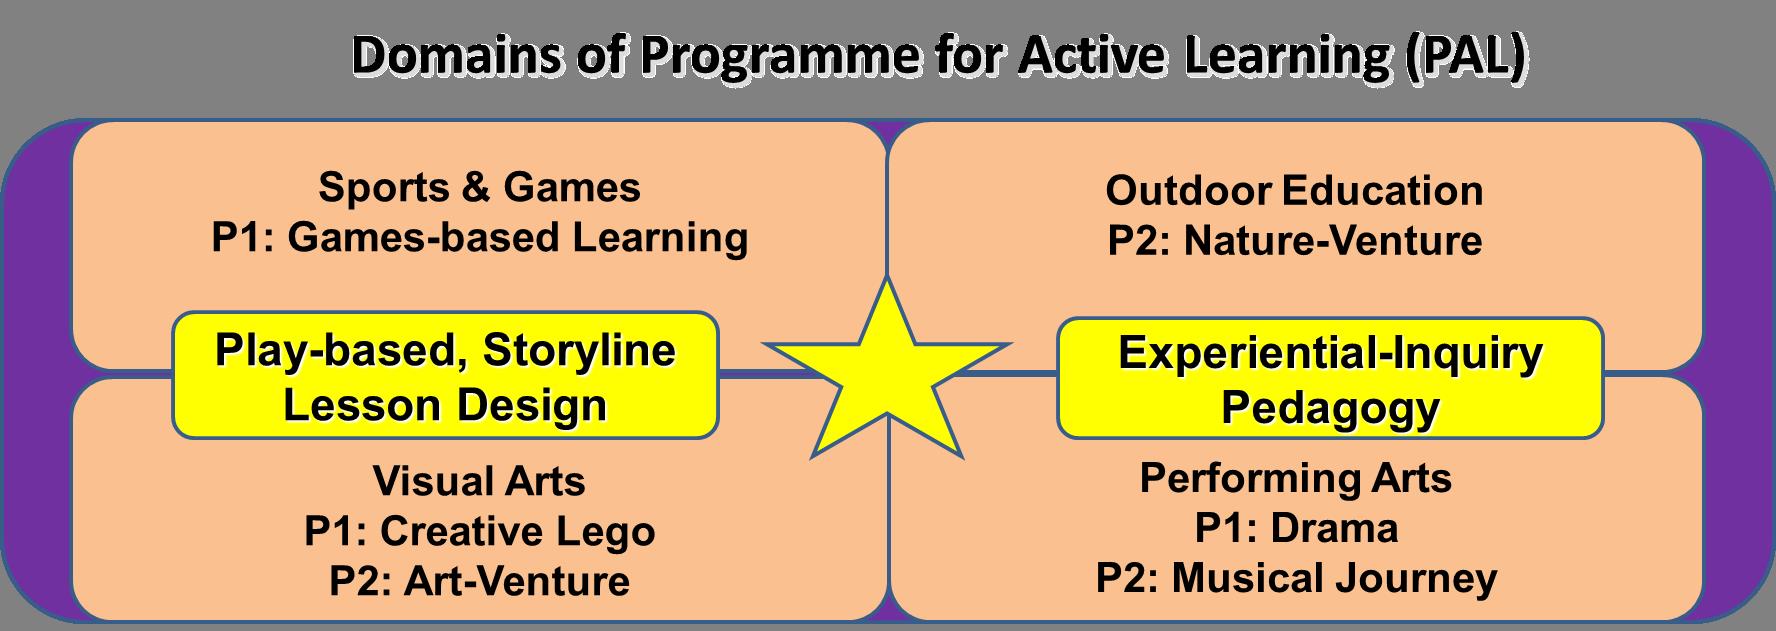 Domains of Programme for Active Learning (PAL)